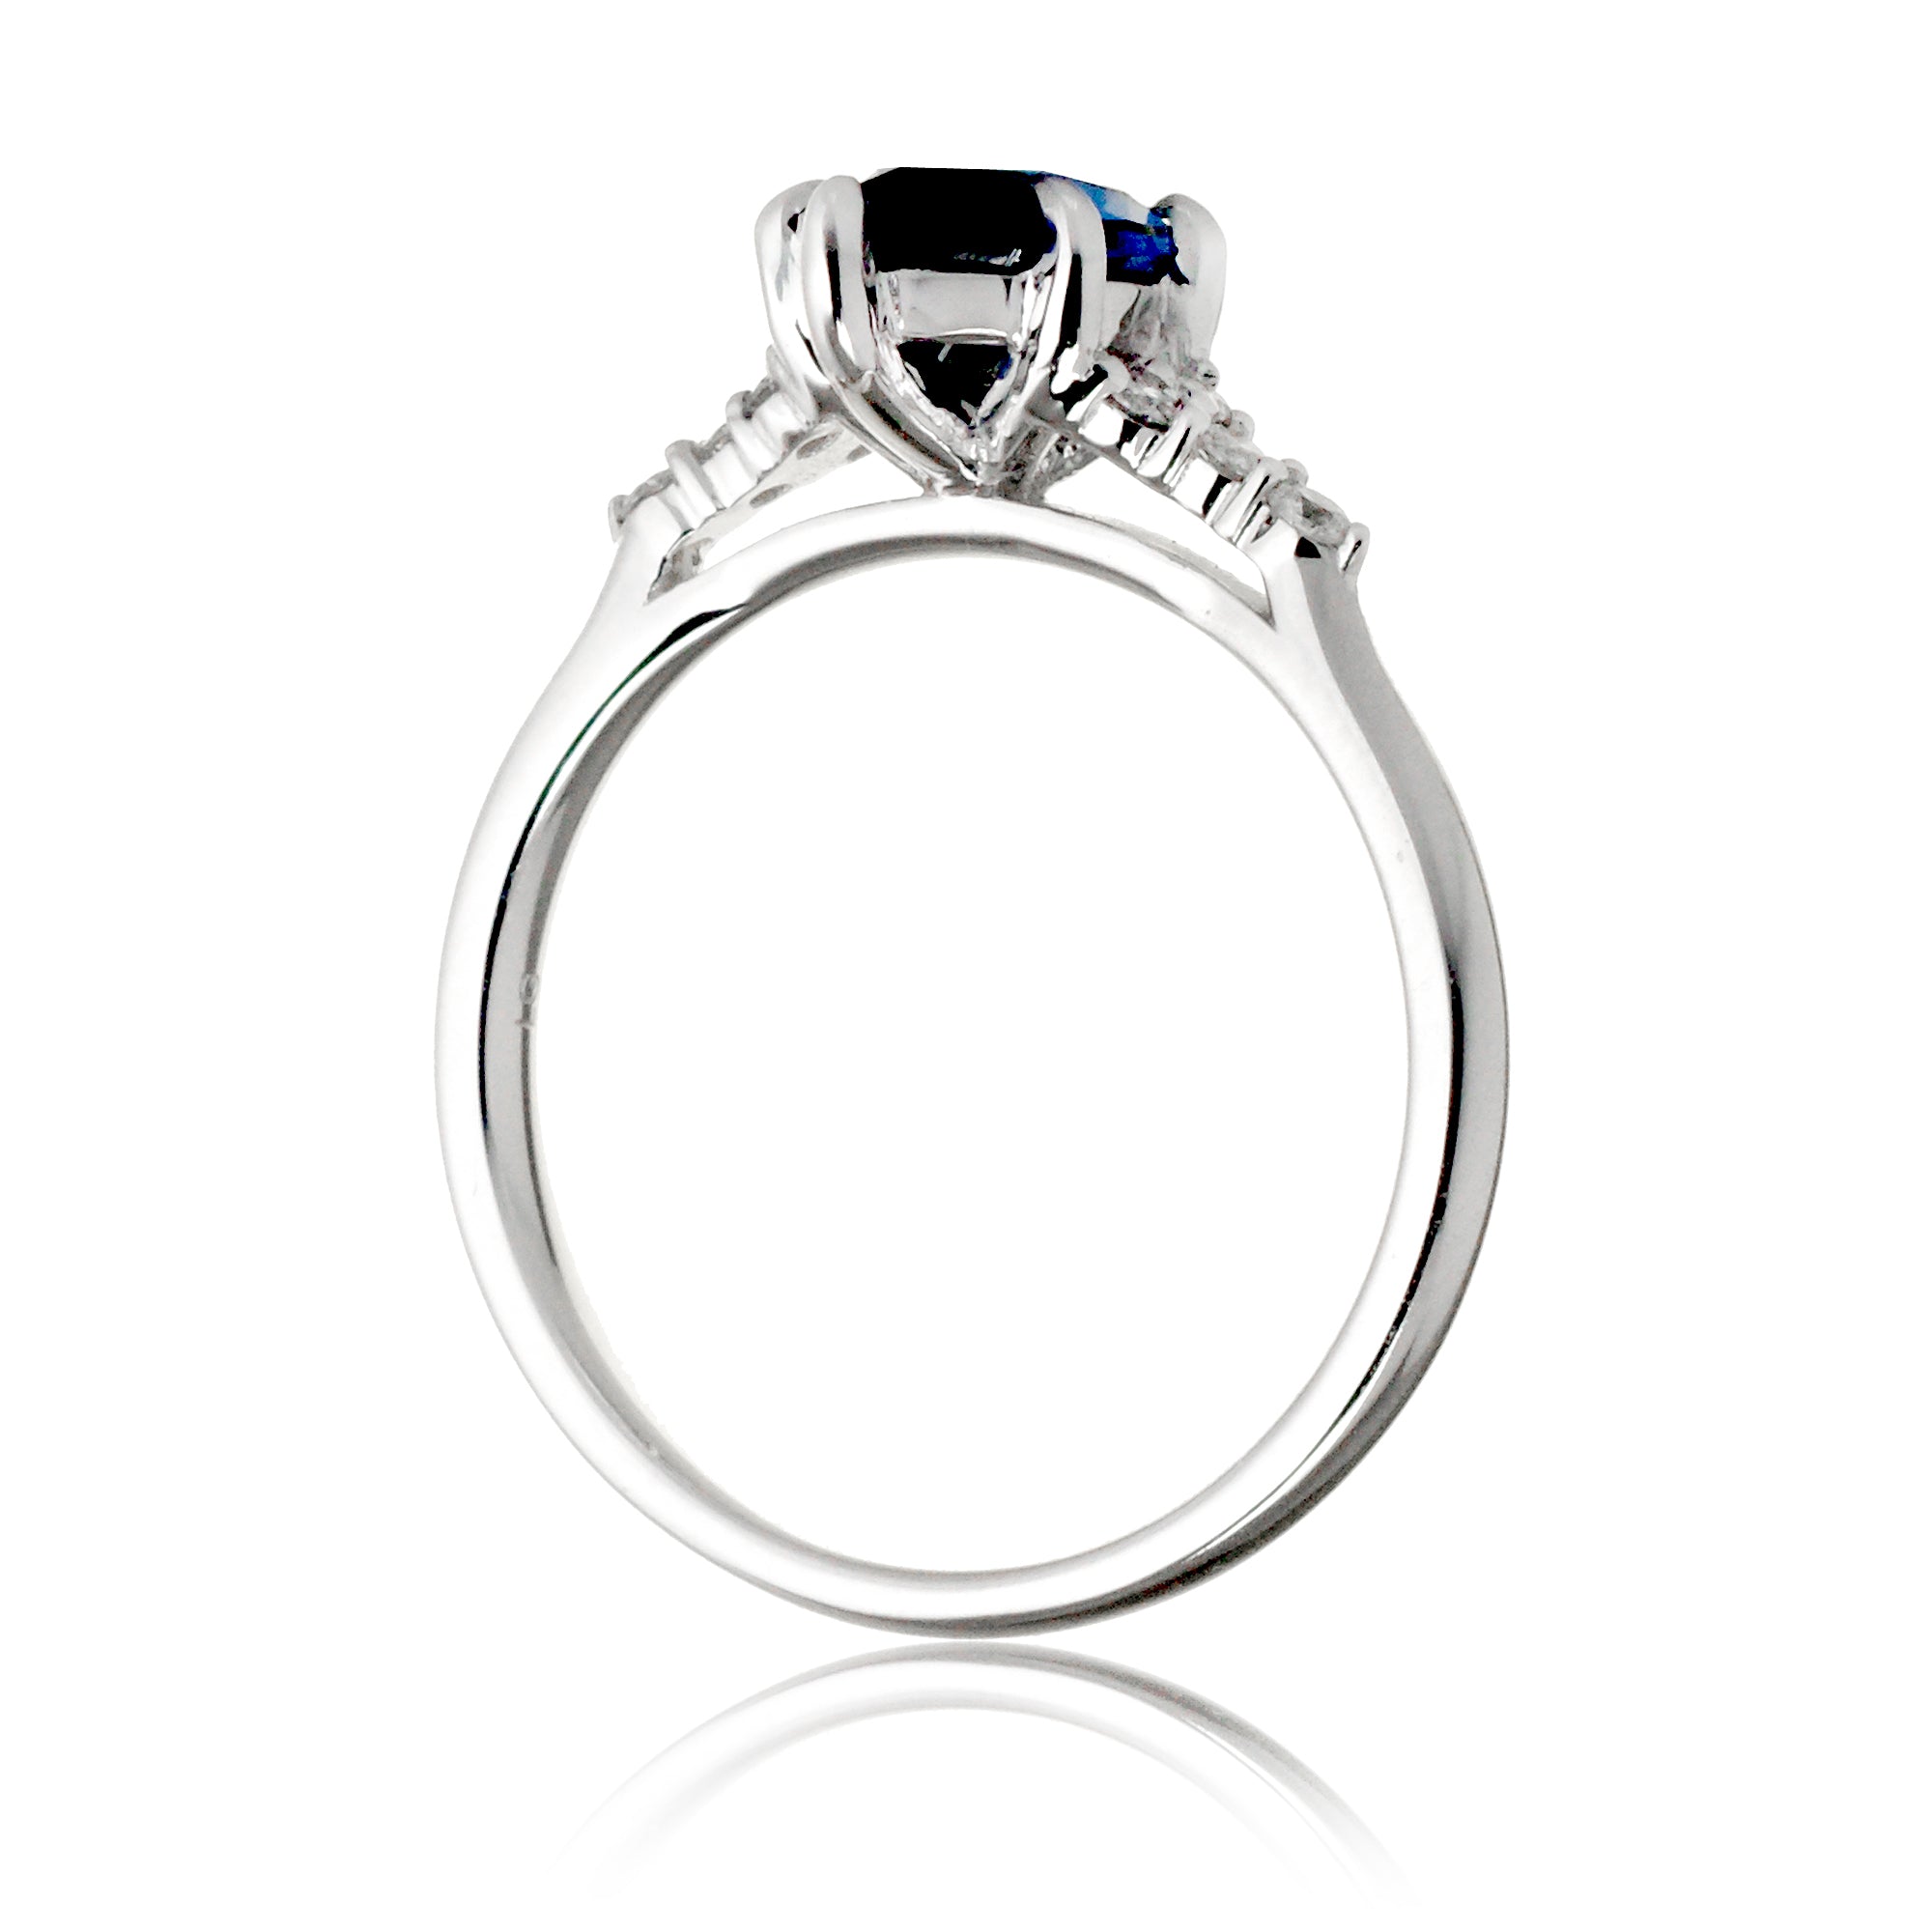 Marquise sapphire diamond three stone engagement ring in white gold